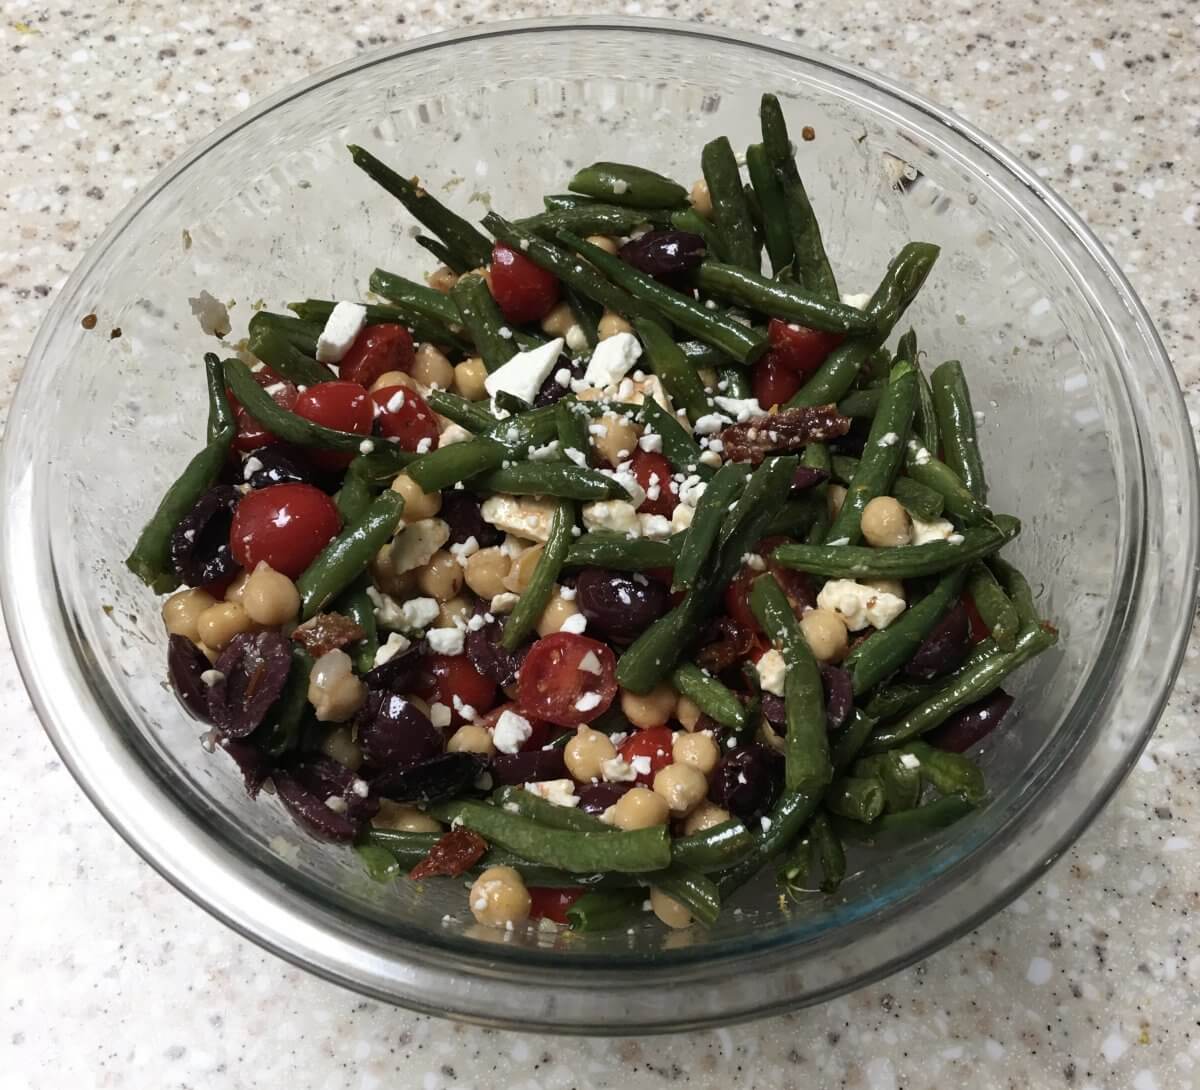 angela's green bean chickpea and sundried tomato salad with feta and olives